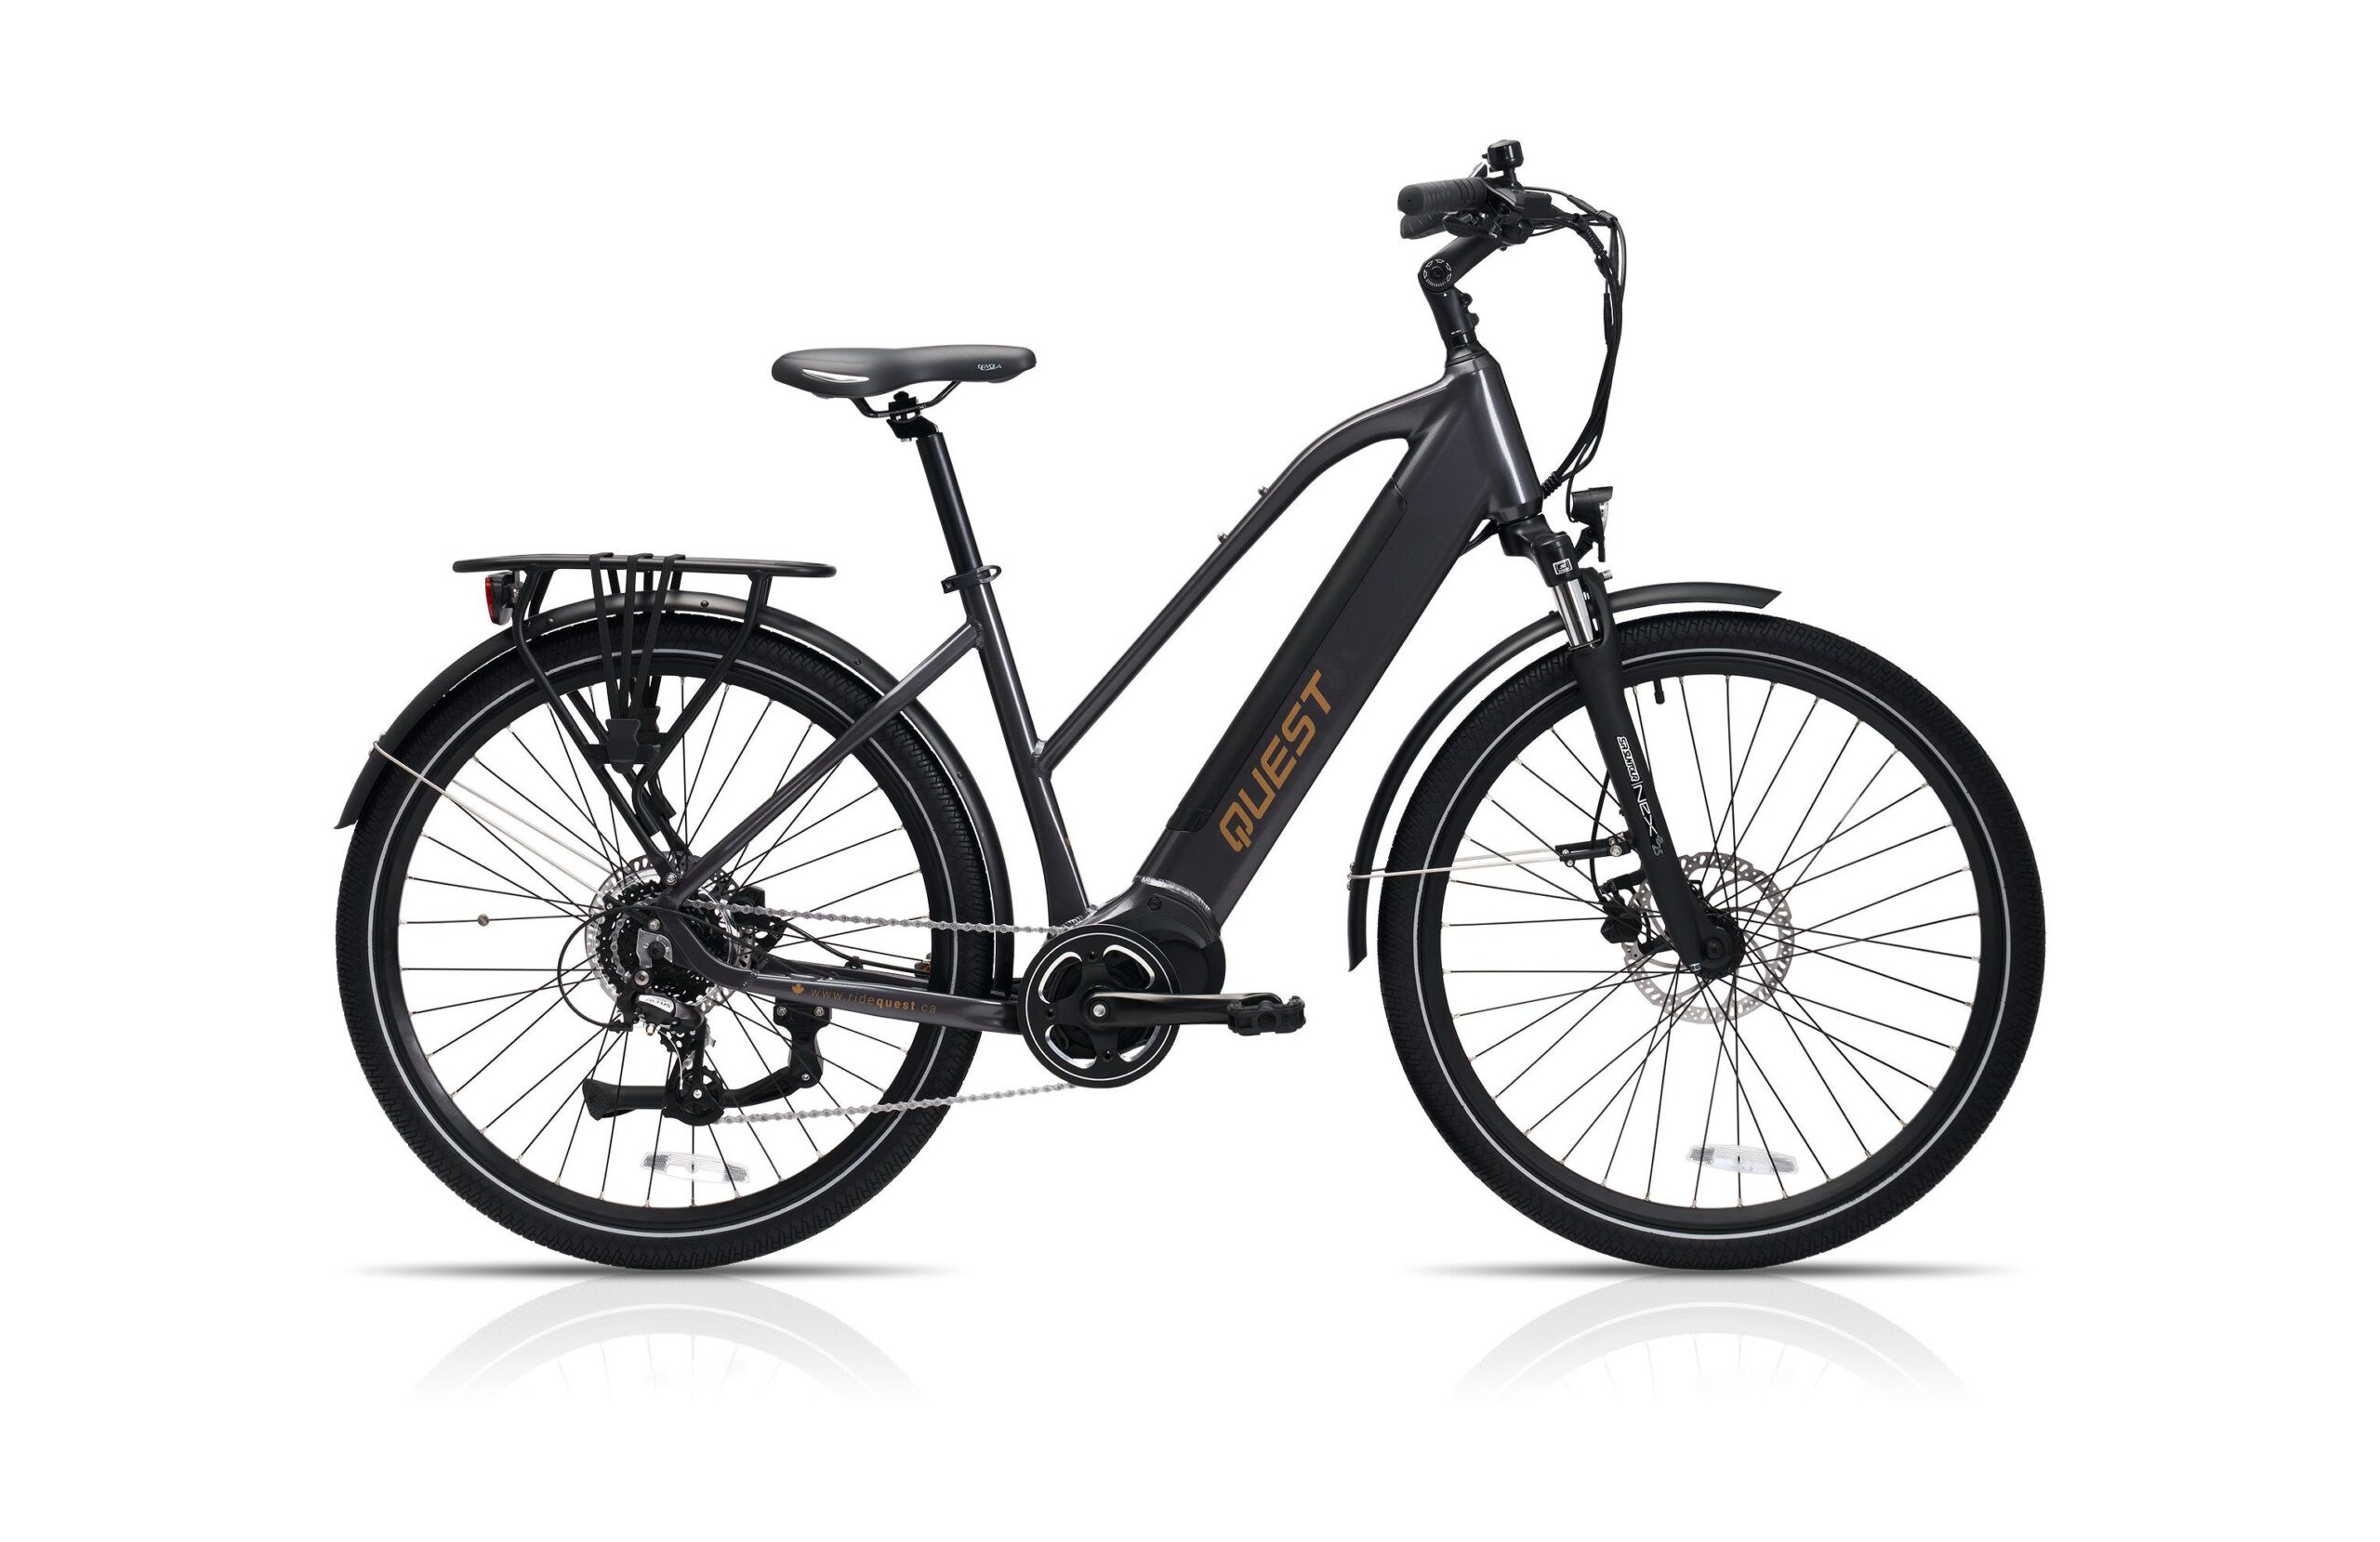 Any opinions/experience with Quest Mid ebike? I’m cautiously optimistic about the specs/value.